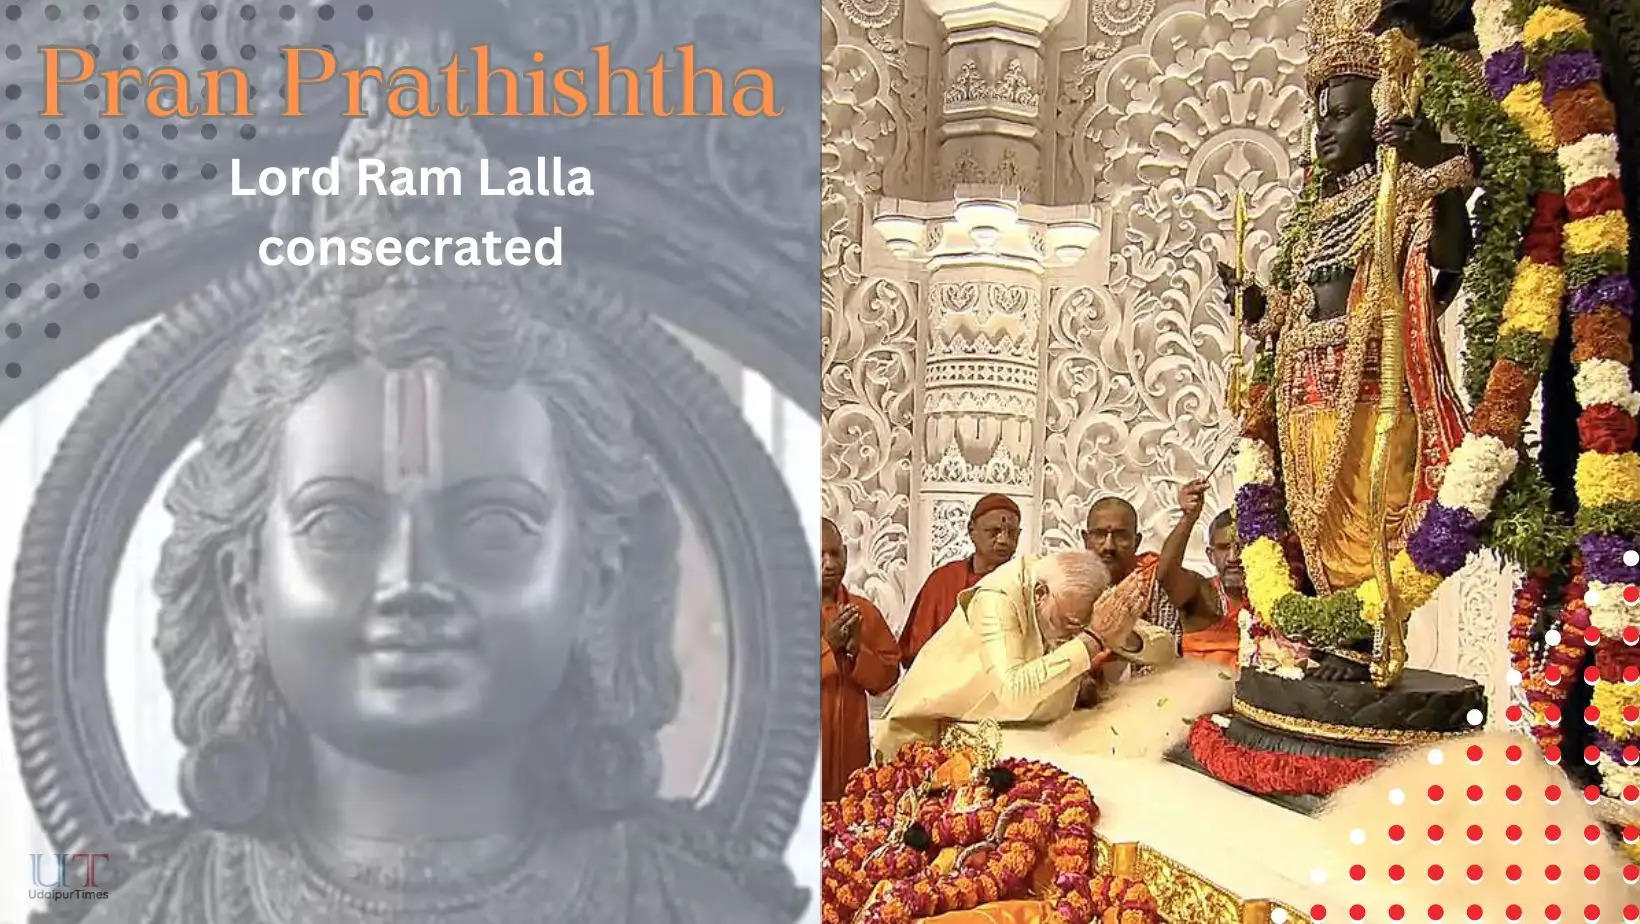 Pran Partishtha Consecration of Ram Lalla Idol Performed at Ayodhya by Prime Minister Narendra Modi